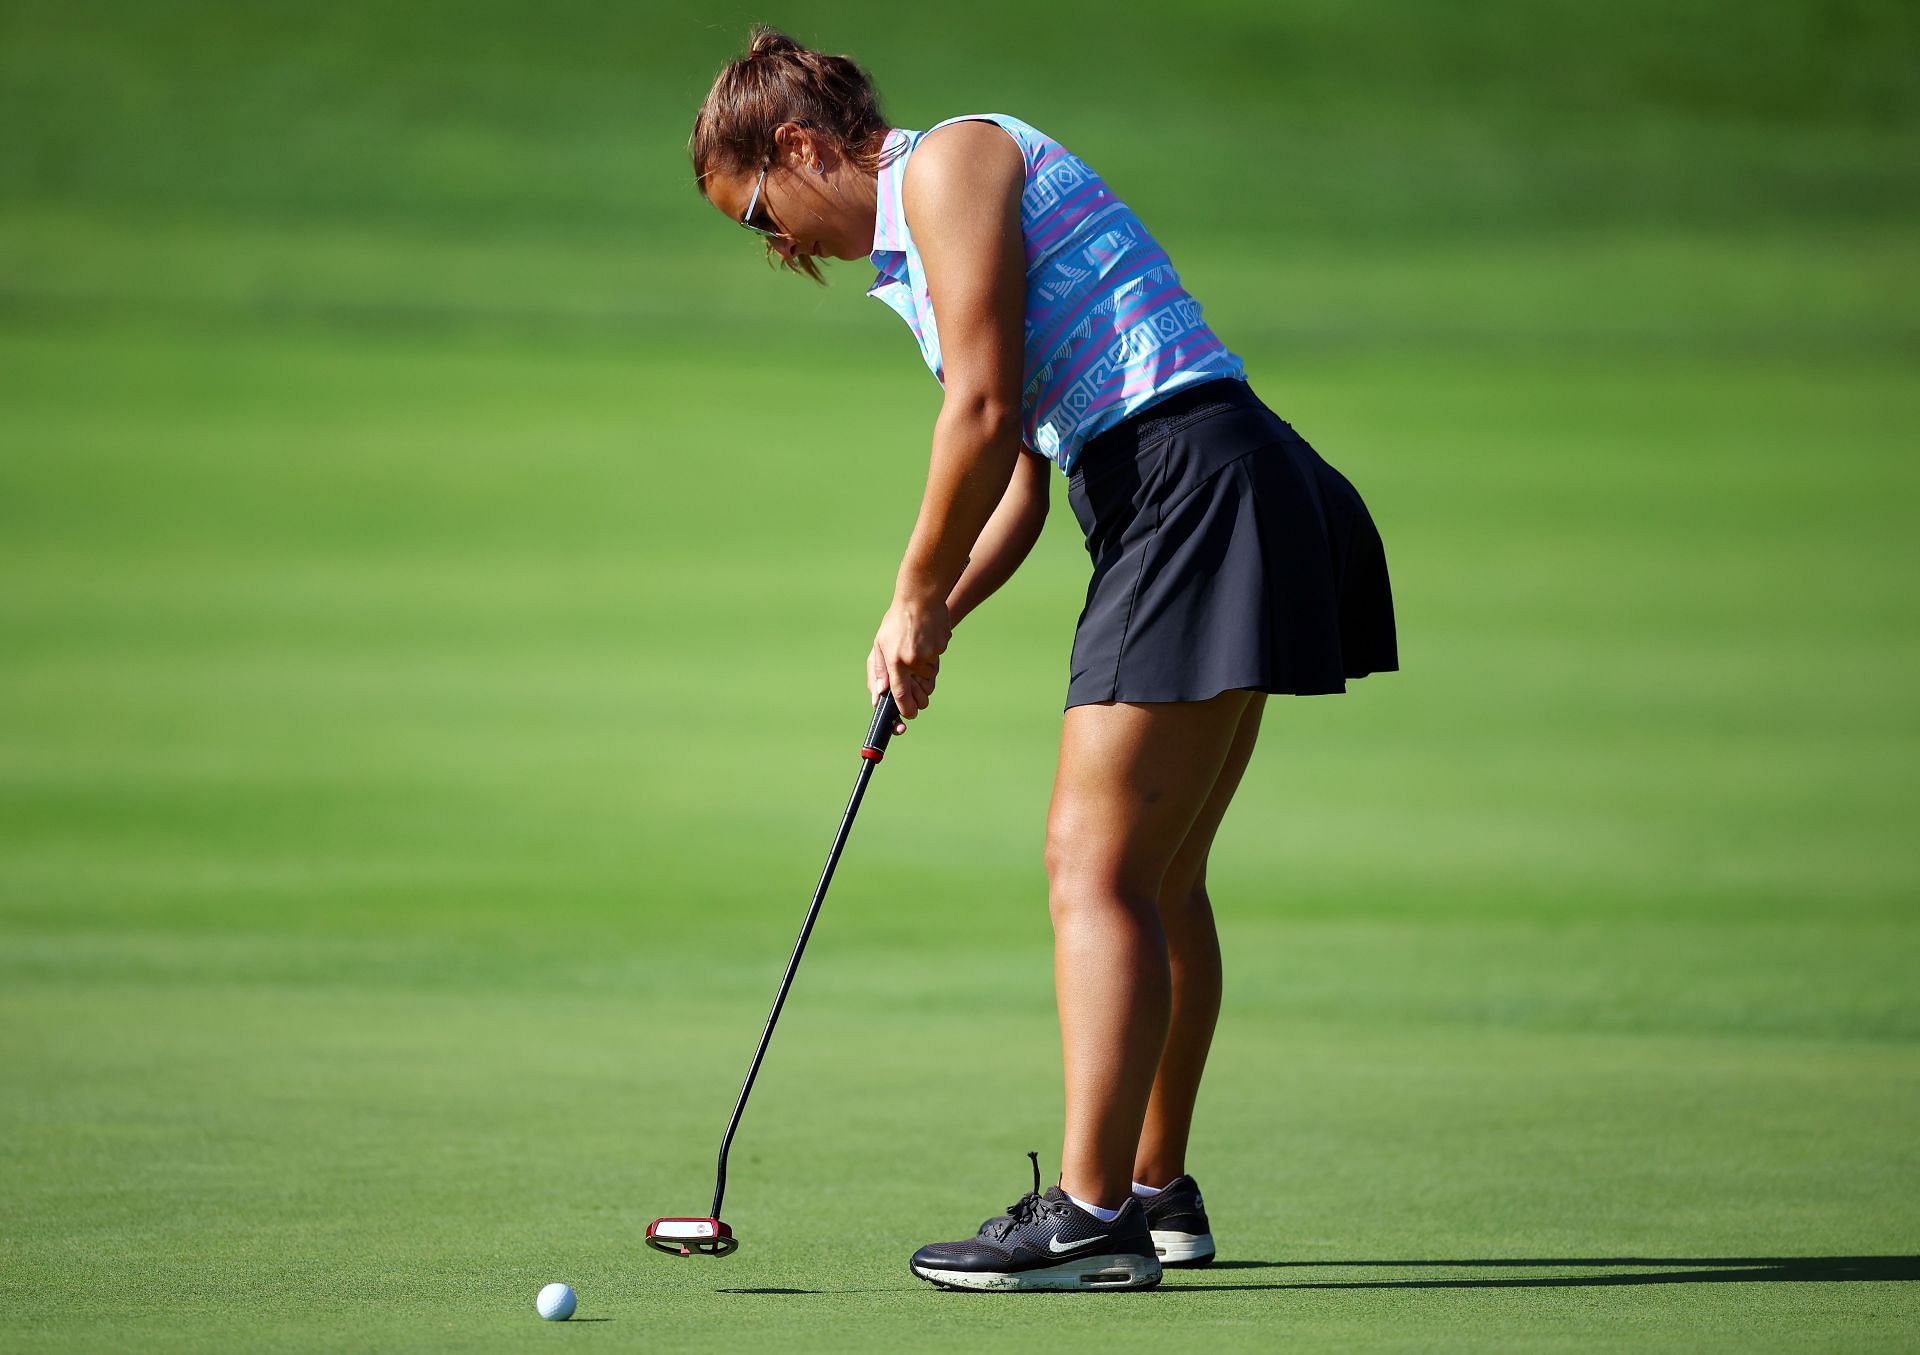 Seven amateurs invited to LPGA's Chevron Championship: All you need to know